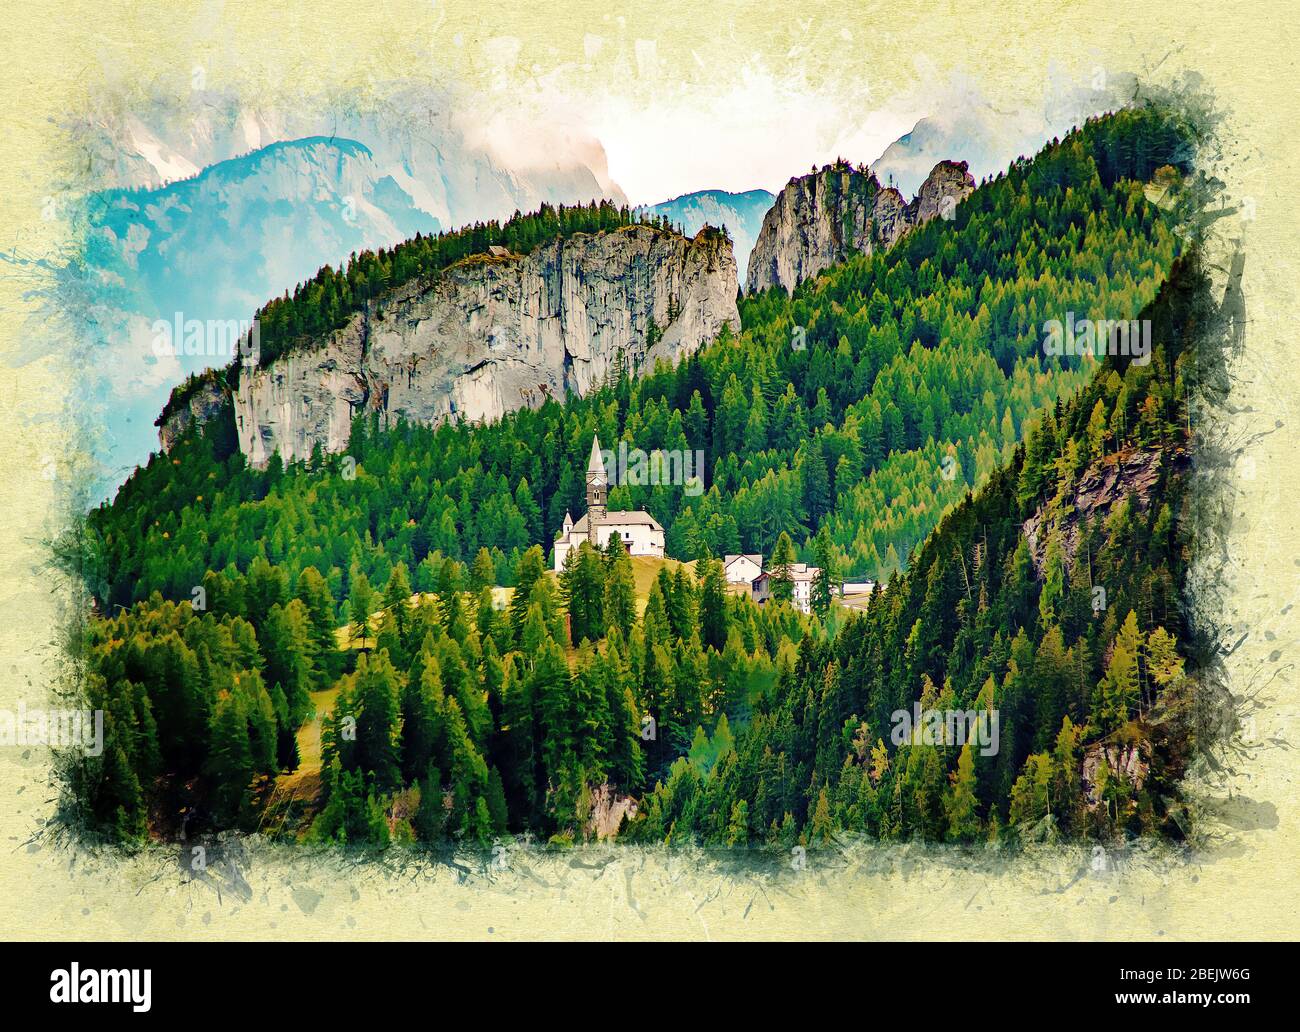 Small church with a chapel on a background of a mountain forest in the Italian Dolomite Alps, Italy. Artistic sketch style. Stock Photo